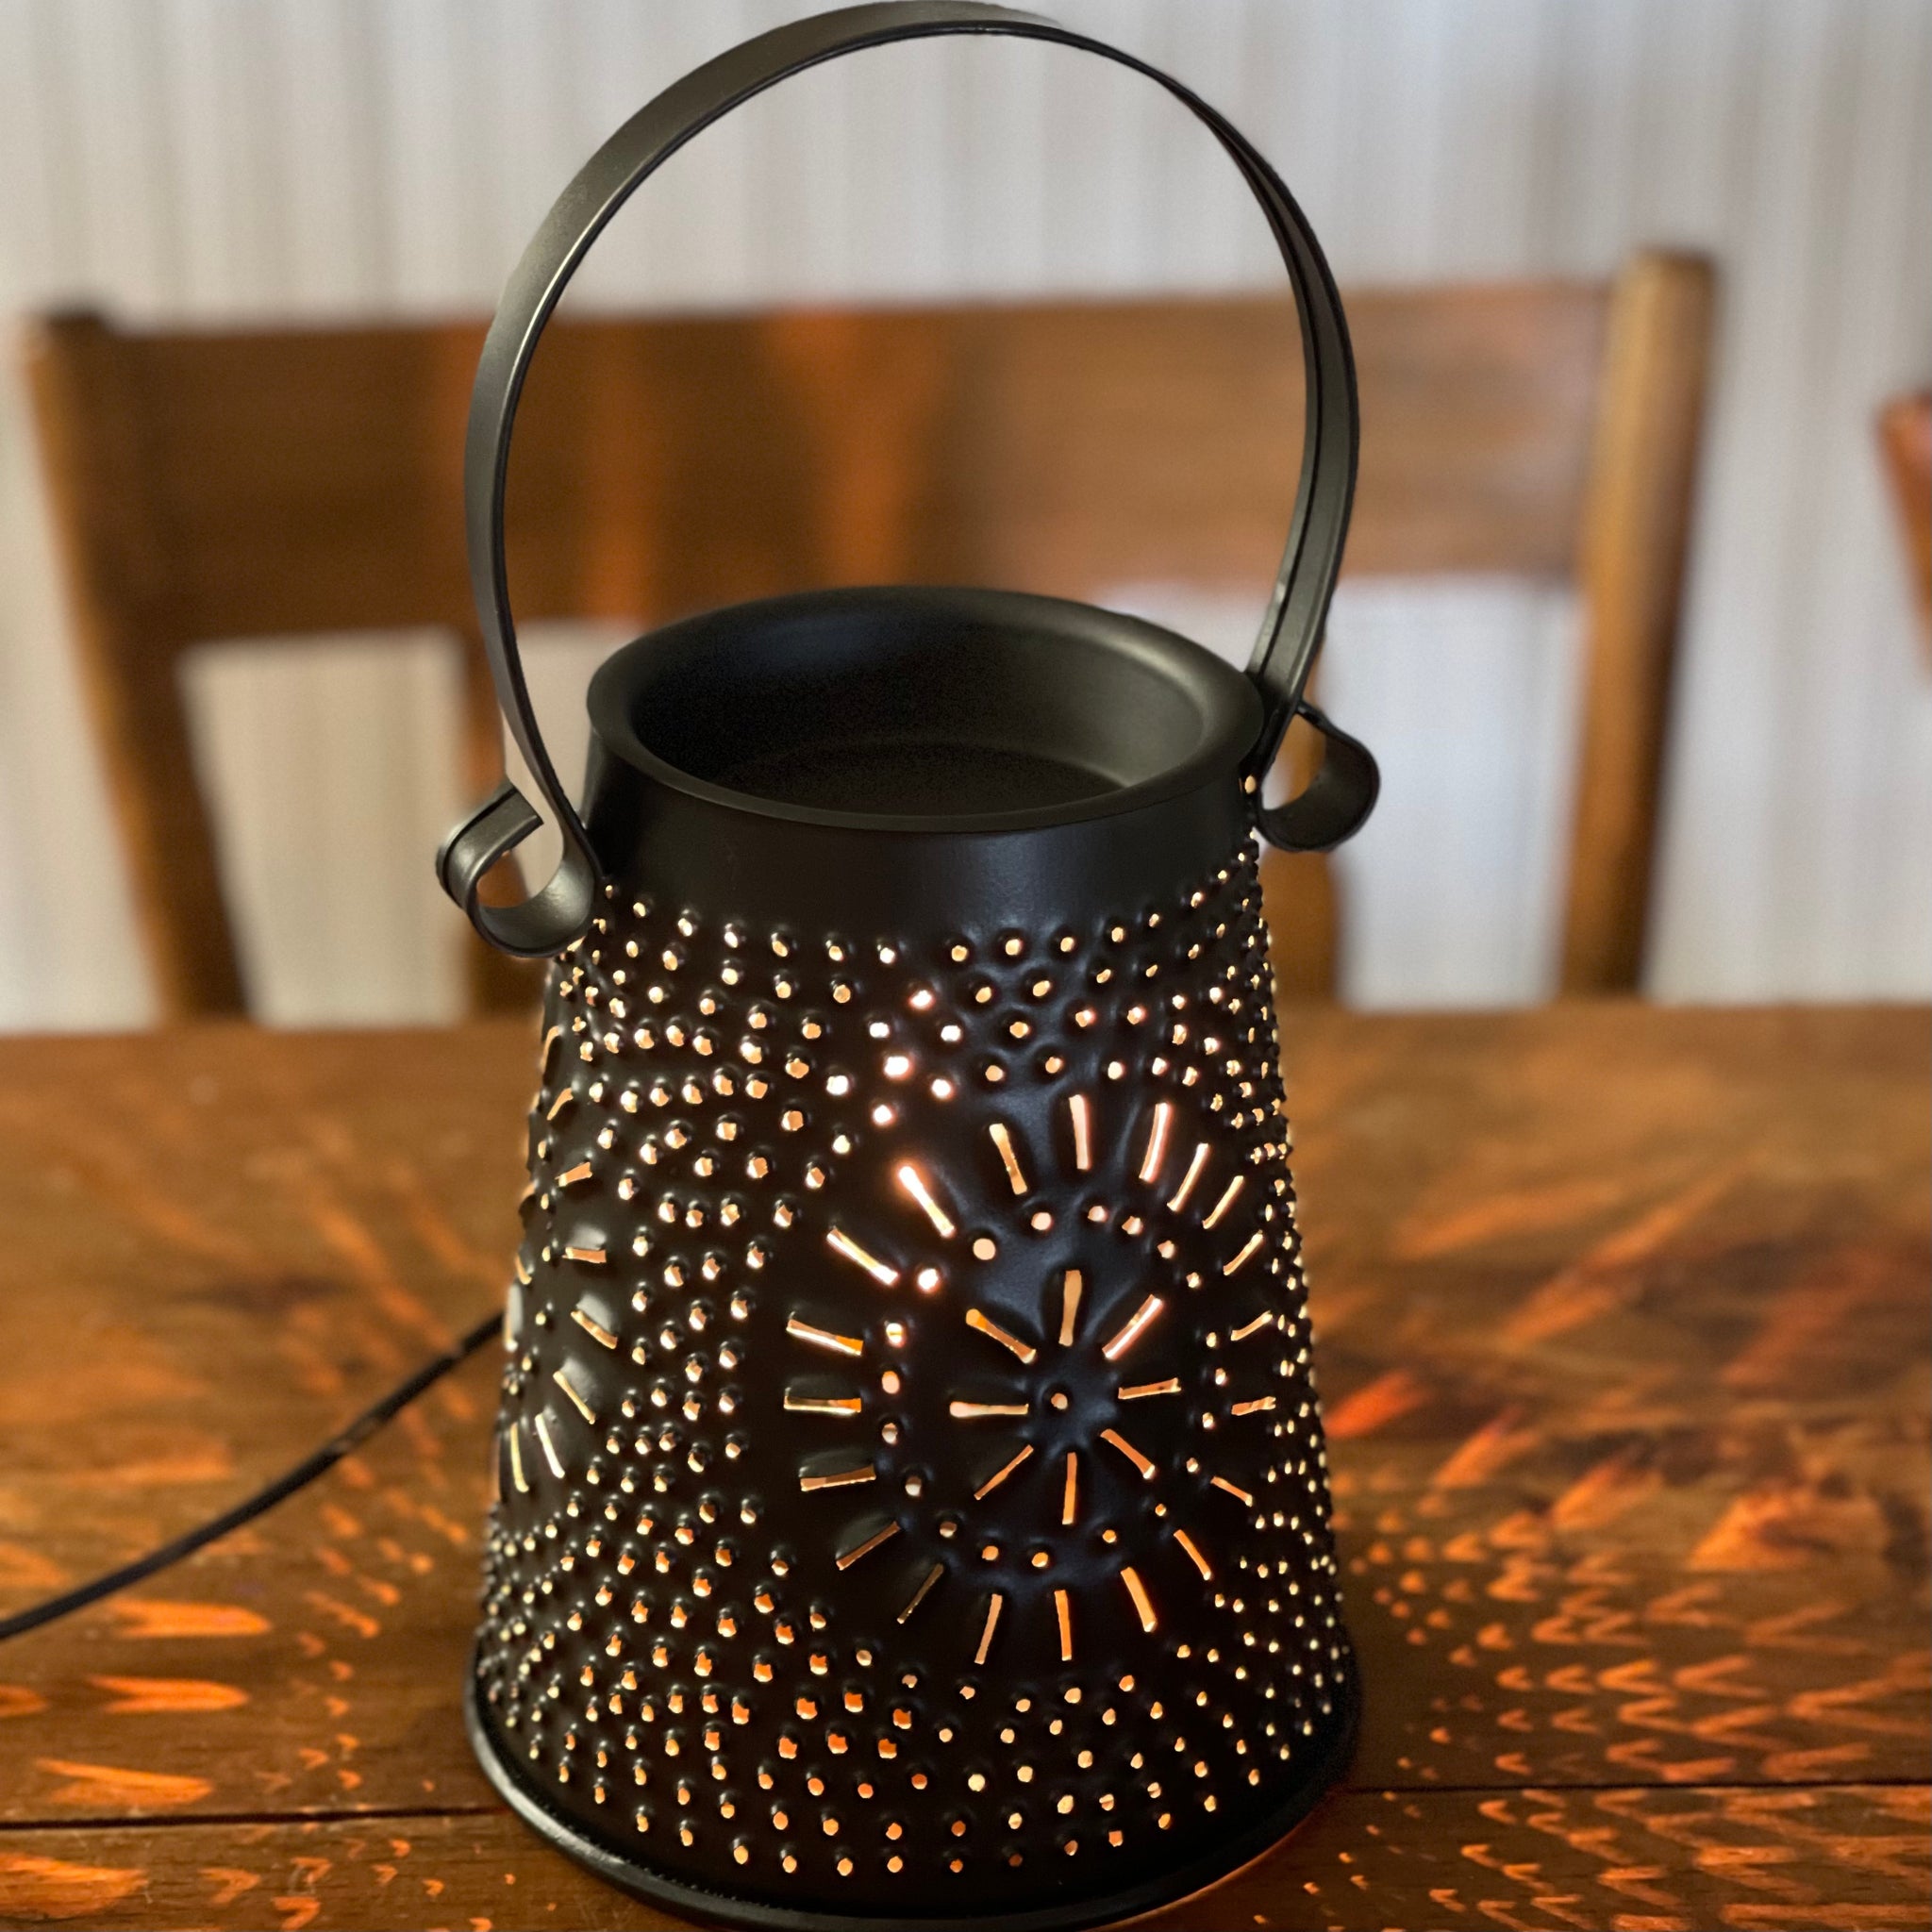 Country Wax Warmer | FREE Home Sweet Home Melt Included- Limited Time Special!